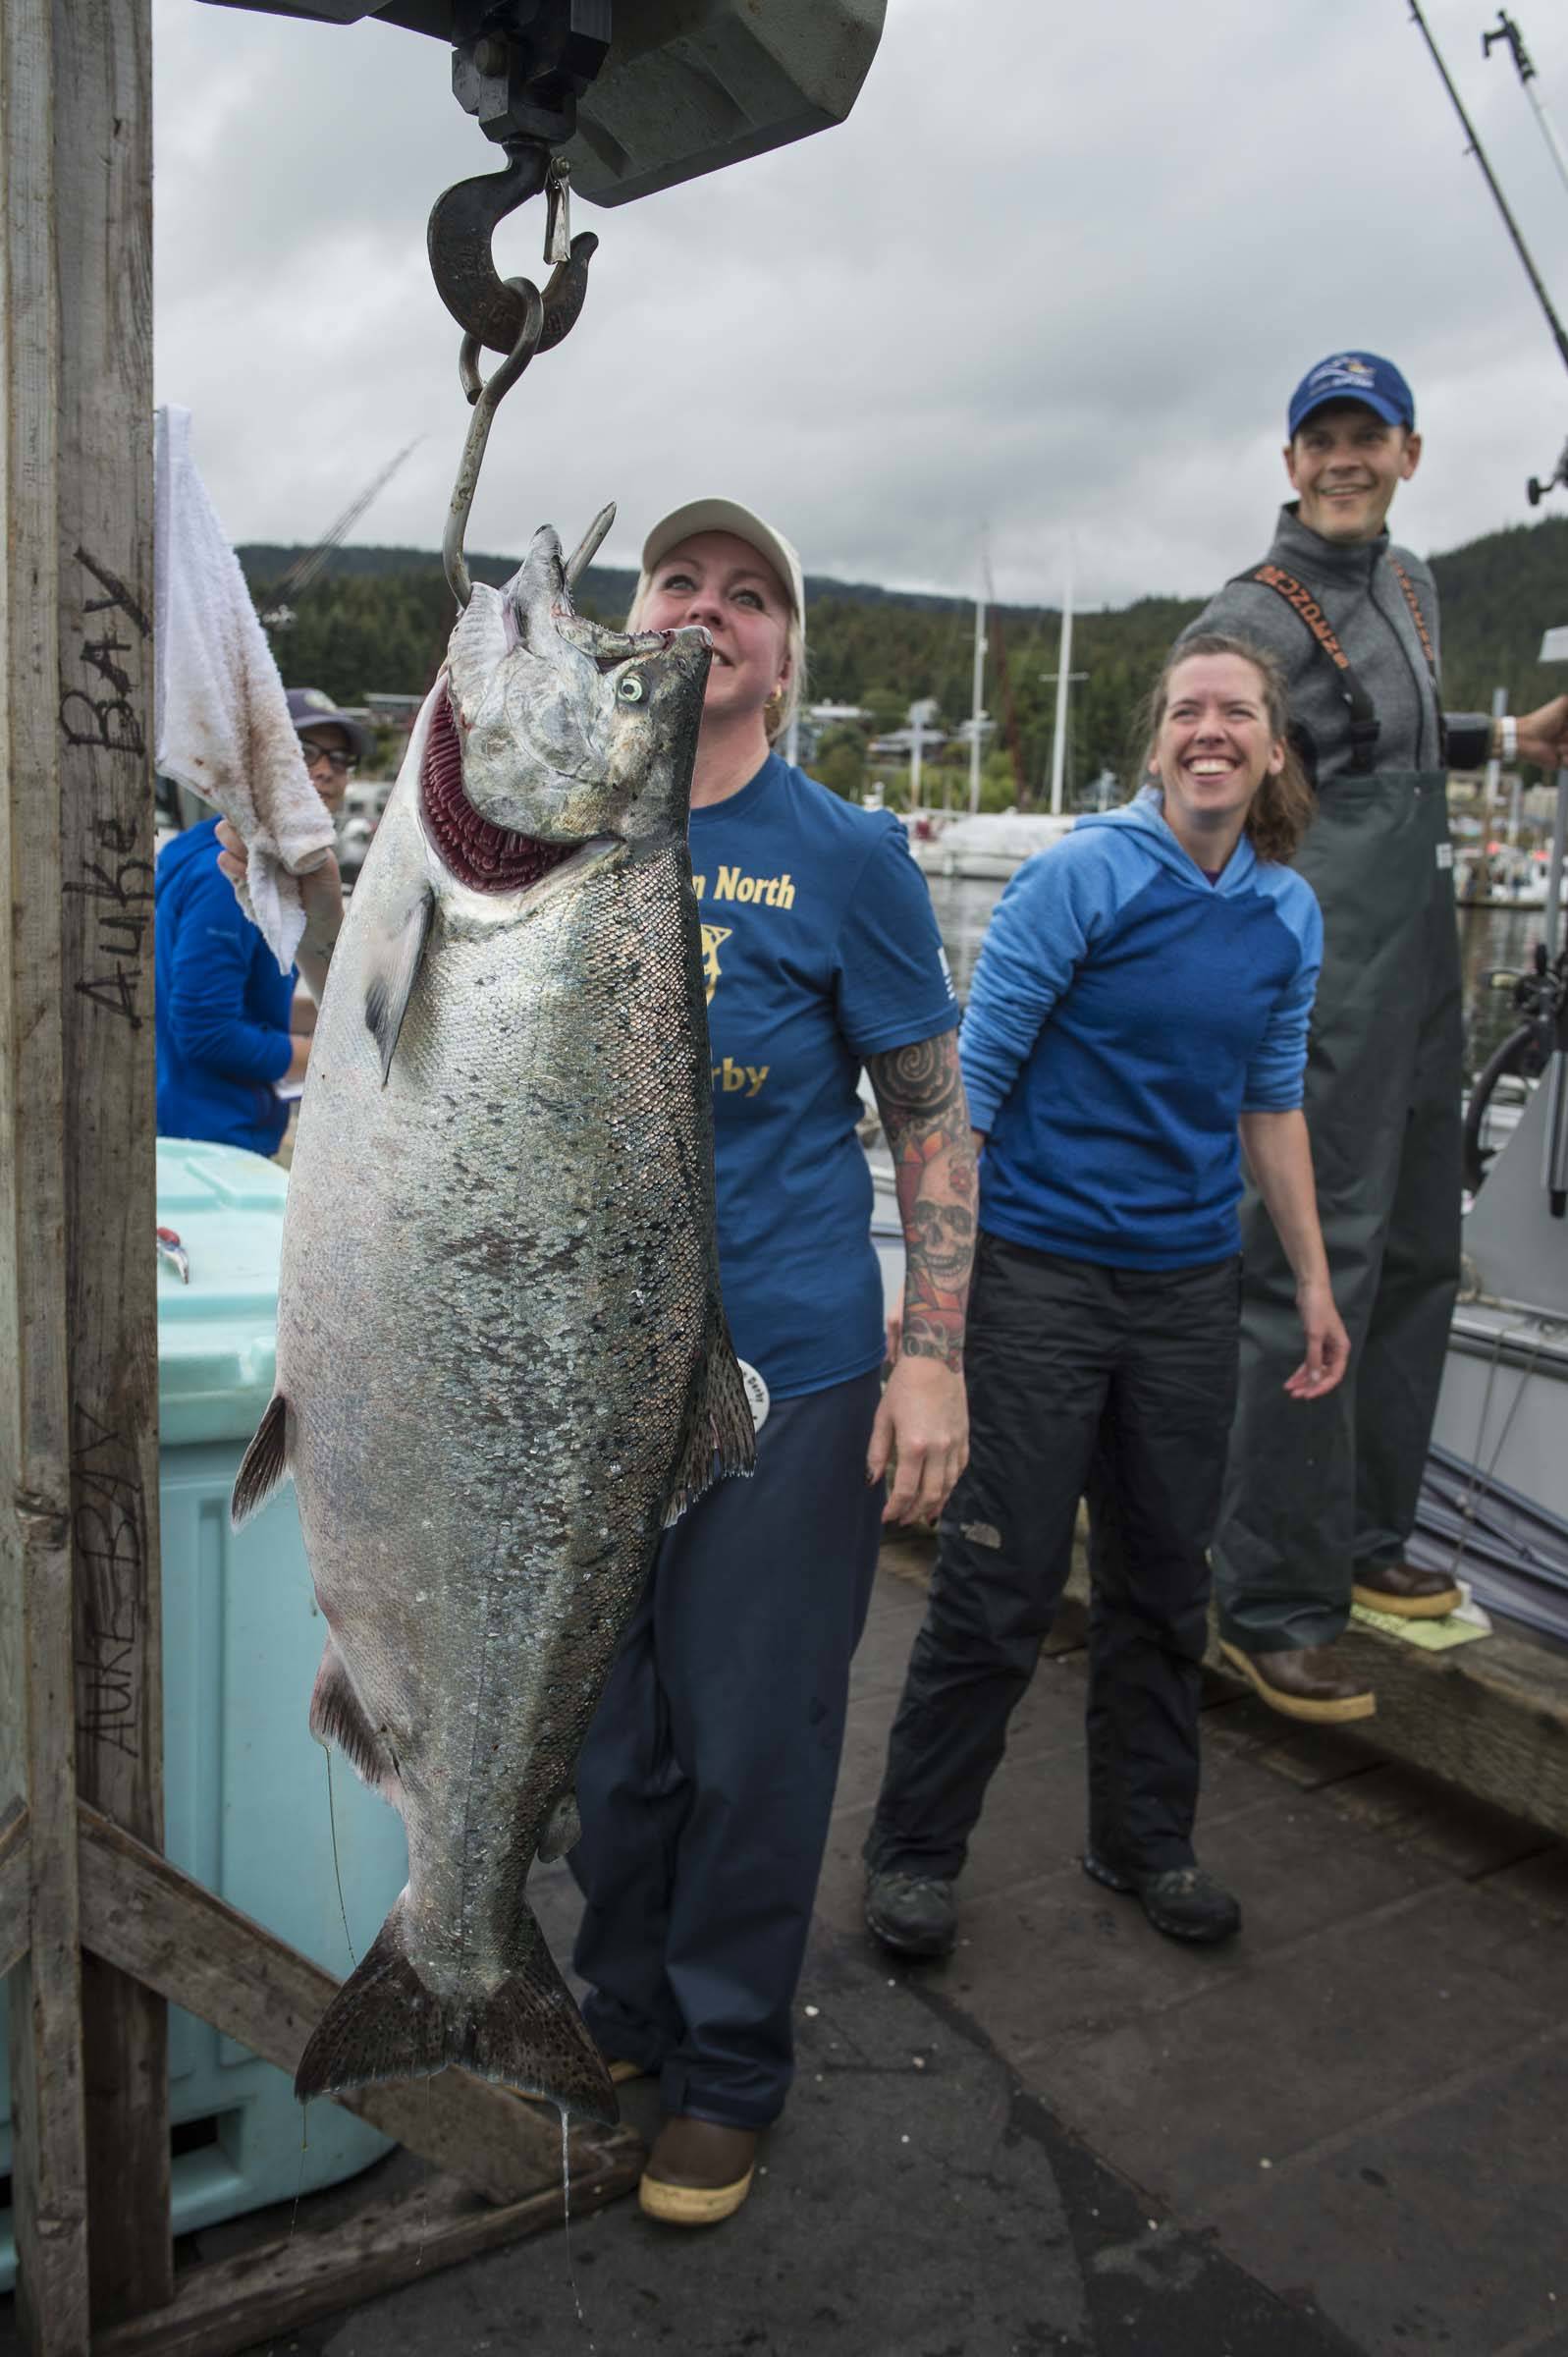 Sadie Wright, center, and Chris Krenz, right, watch as volunteer Kami Bartness weights Wright’s king salmon at the Golden North Salmon Derby’s station at the Don D. Statter Memorial Boat Harbor on Saturday, Aug. 24, 2019. The fish weighted in at 20.1 pounds. (Michael Penn | Juneau Empire)